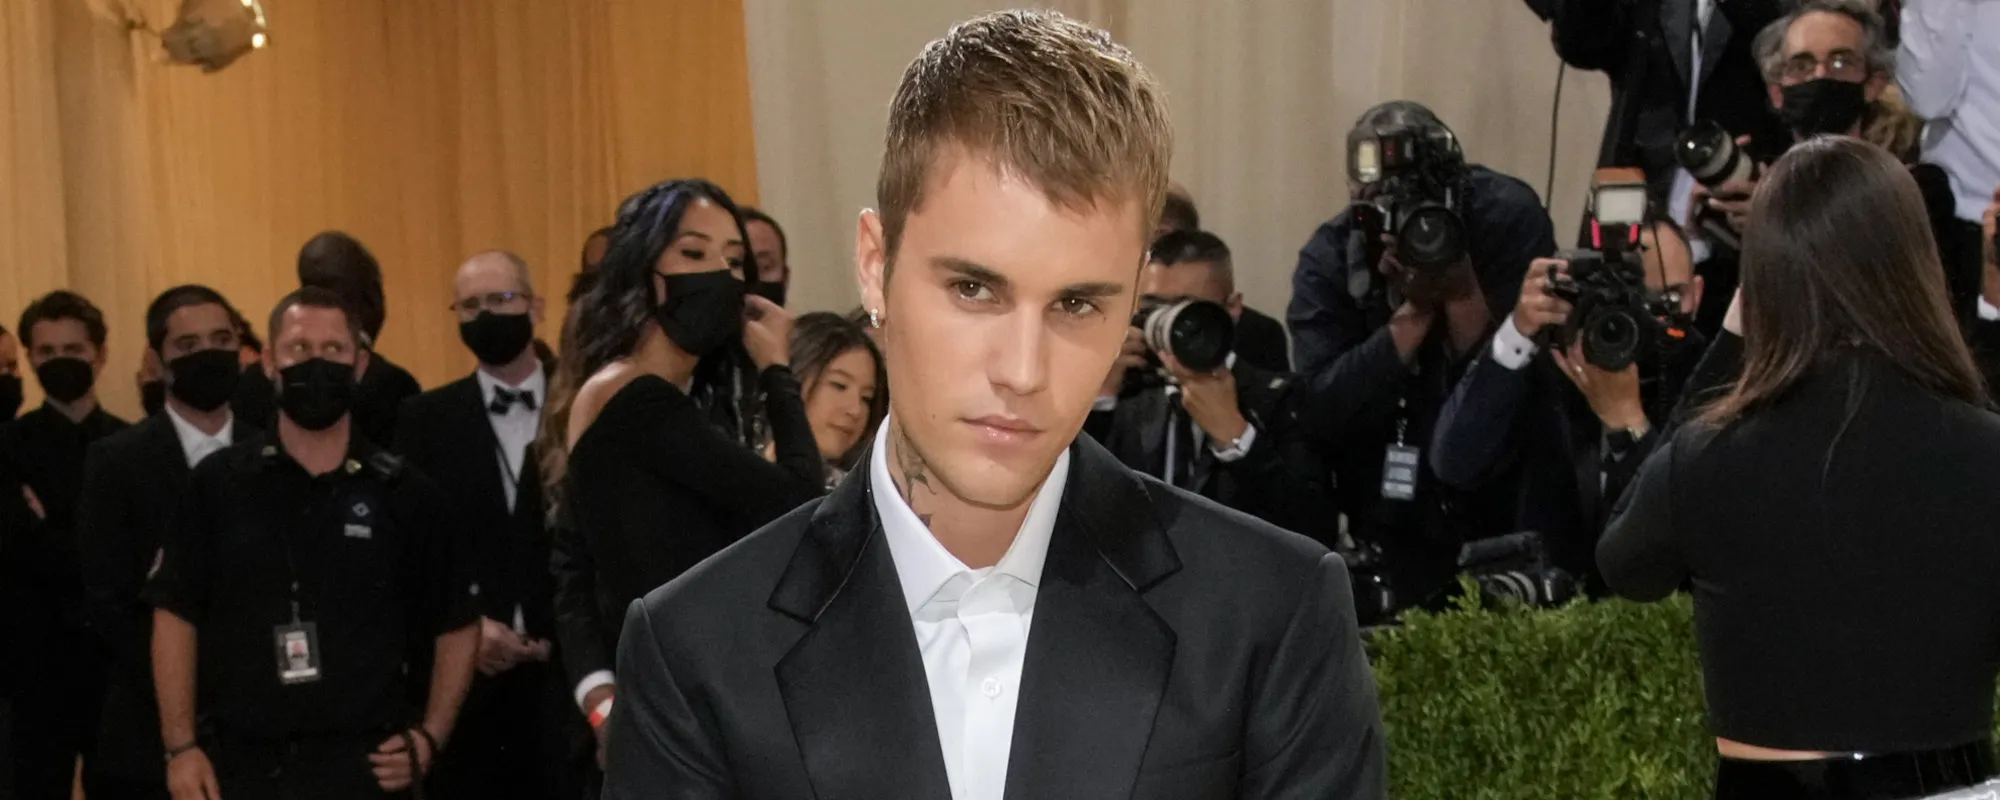 Justin Bieber Postpones The Remainder of U.S. Tour in Light of Ongoing Ramsay Hunt Recovery